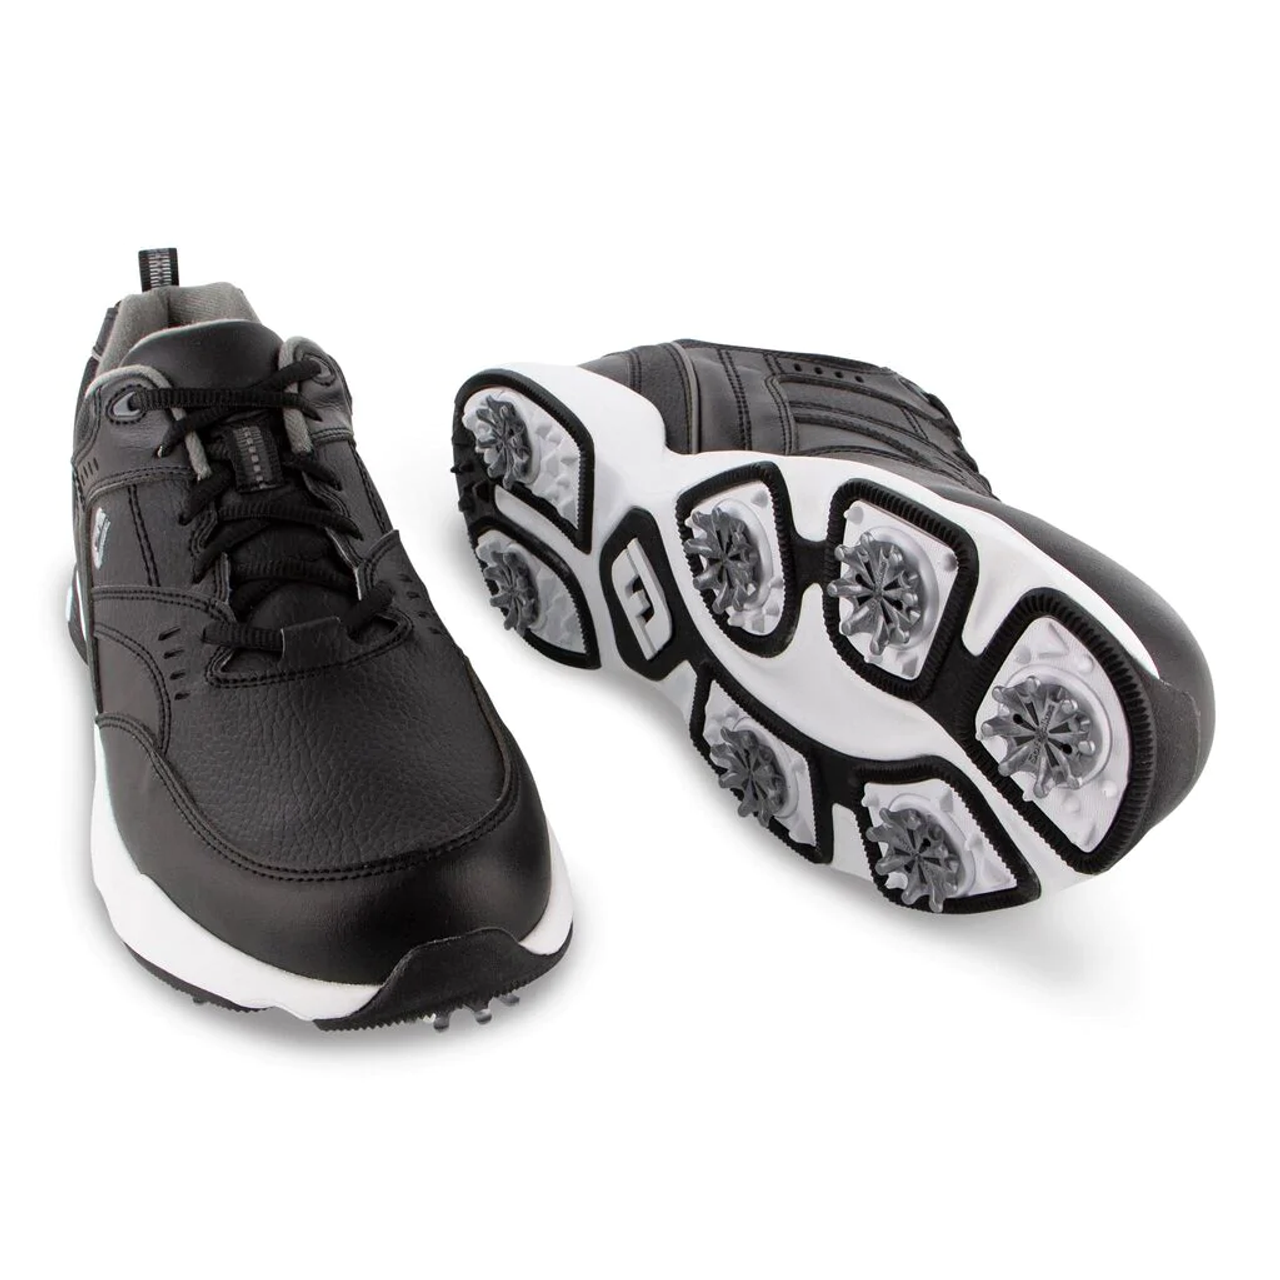 footjoy golf specialty shoes 56732